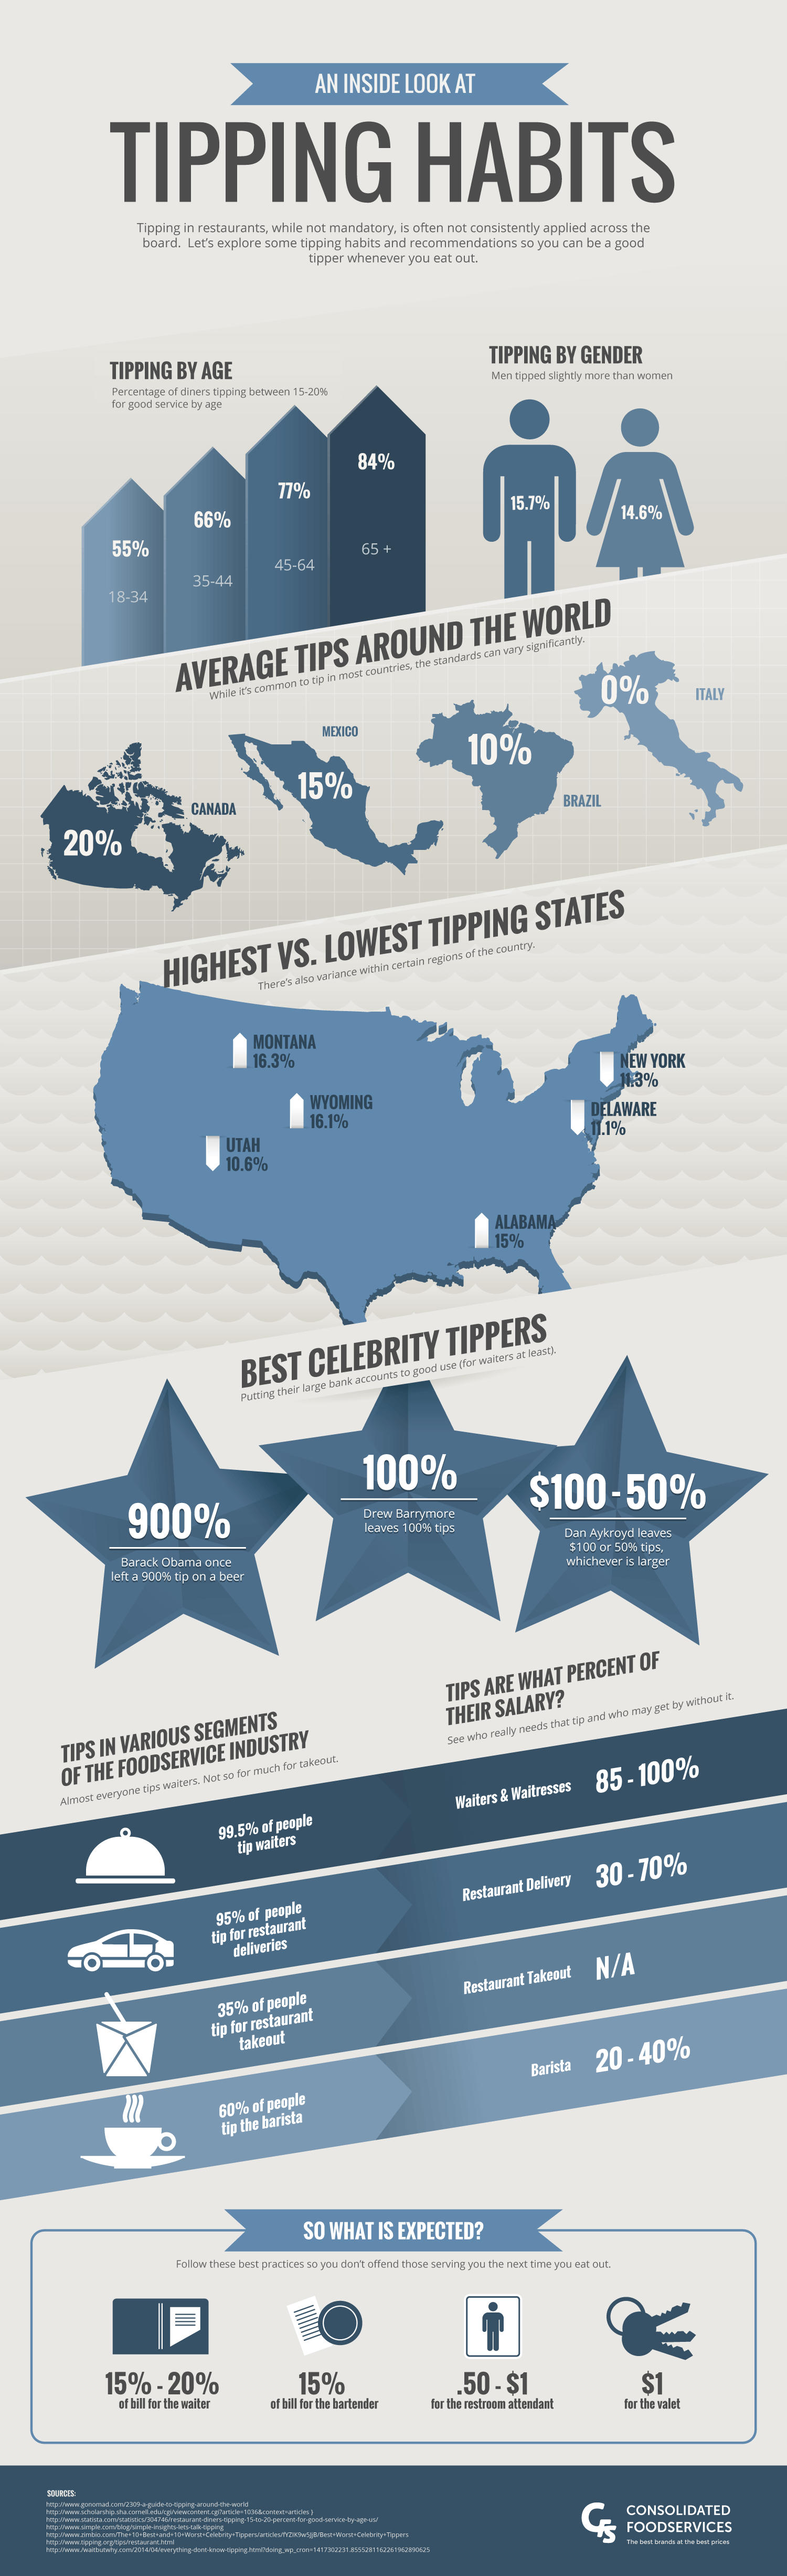 An Inside Look at Tipping Habits Infographic